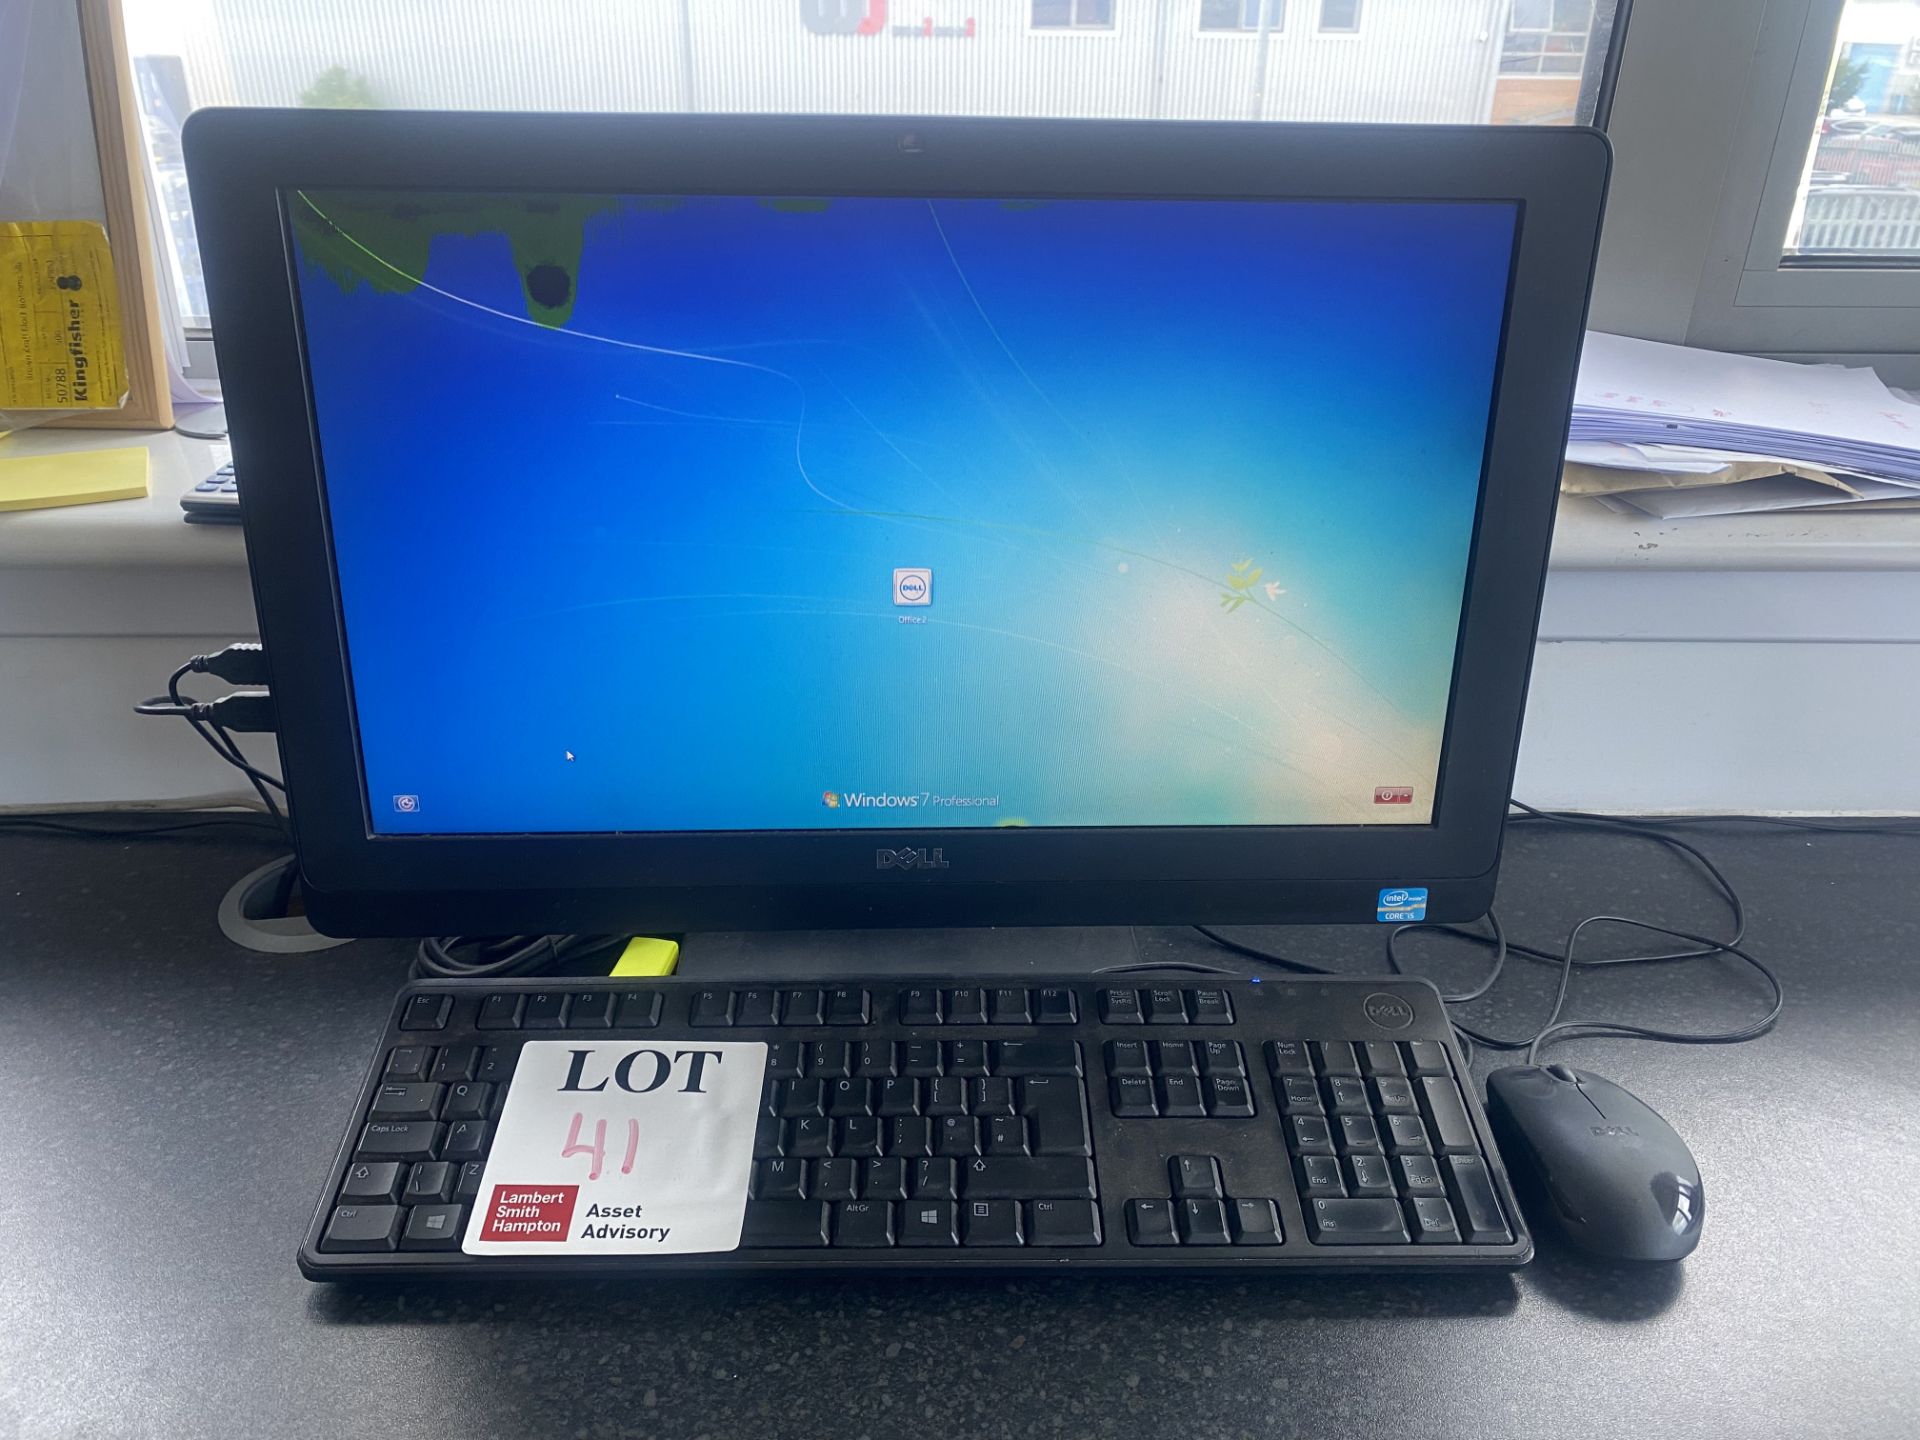 Dell Optiplex 3011 A10 computer/monitor with keyboard and mouse